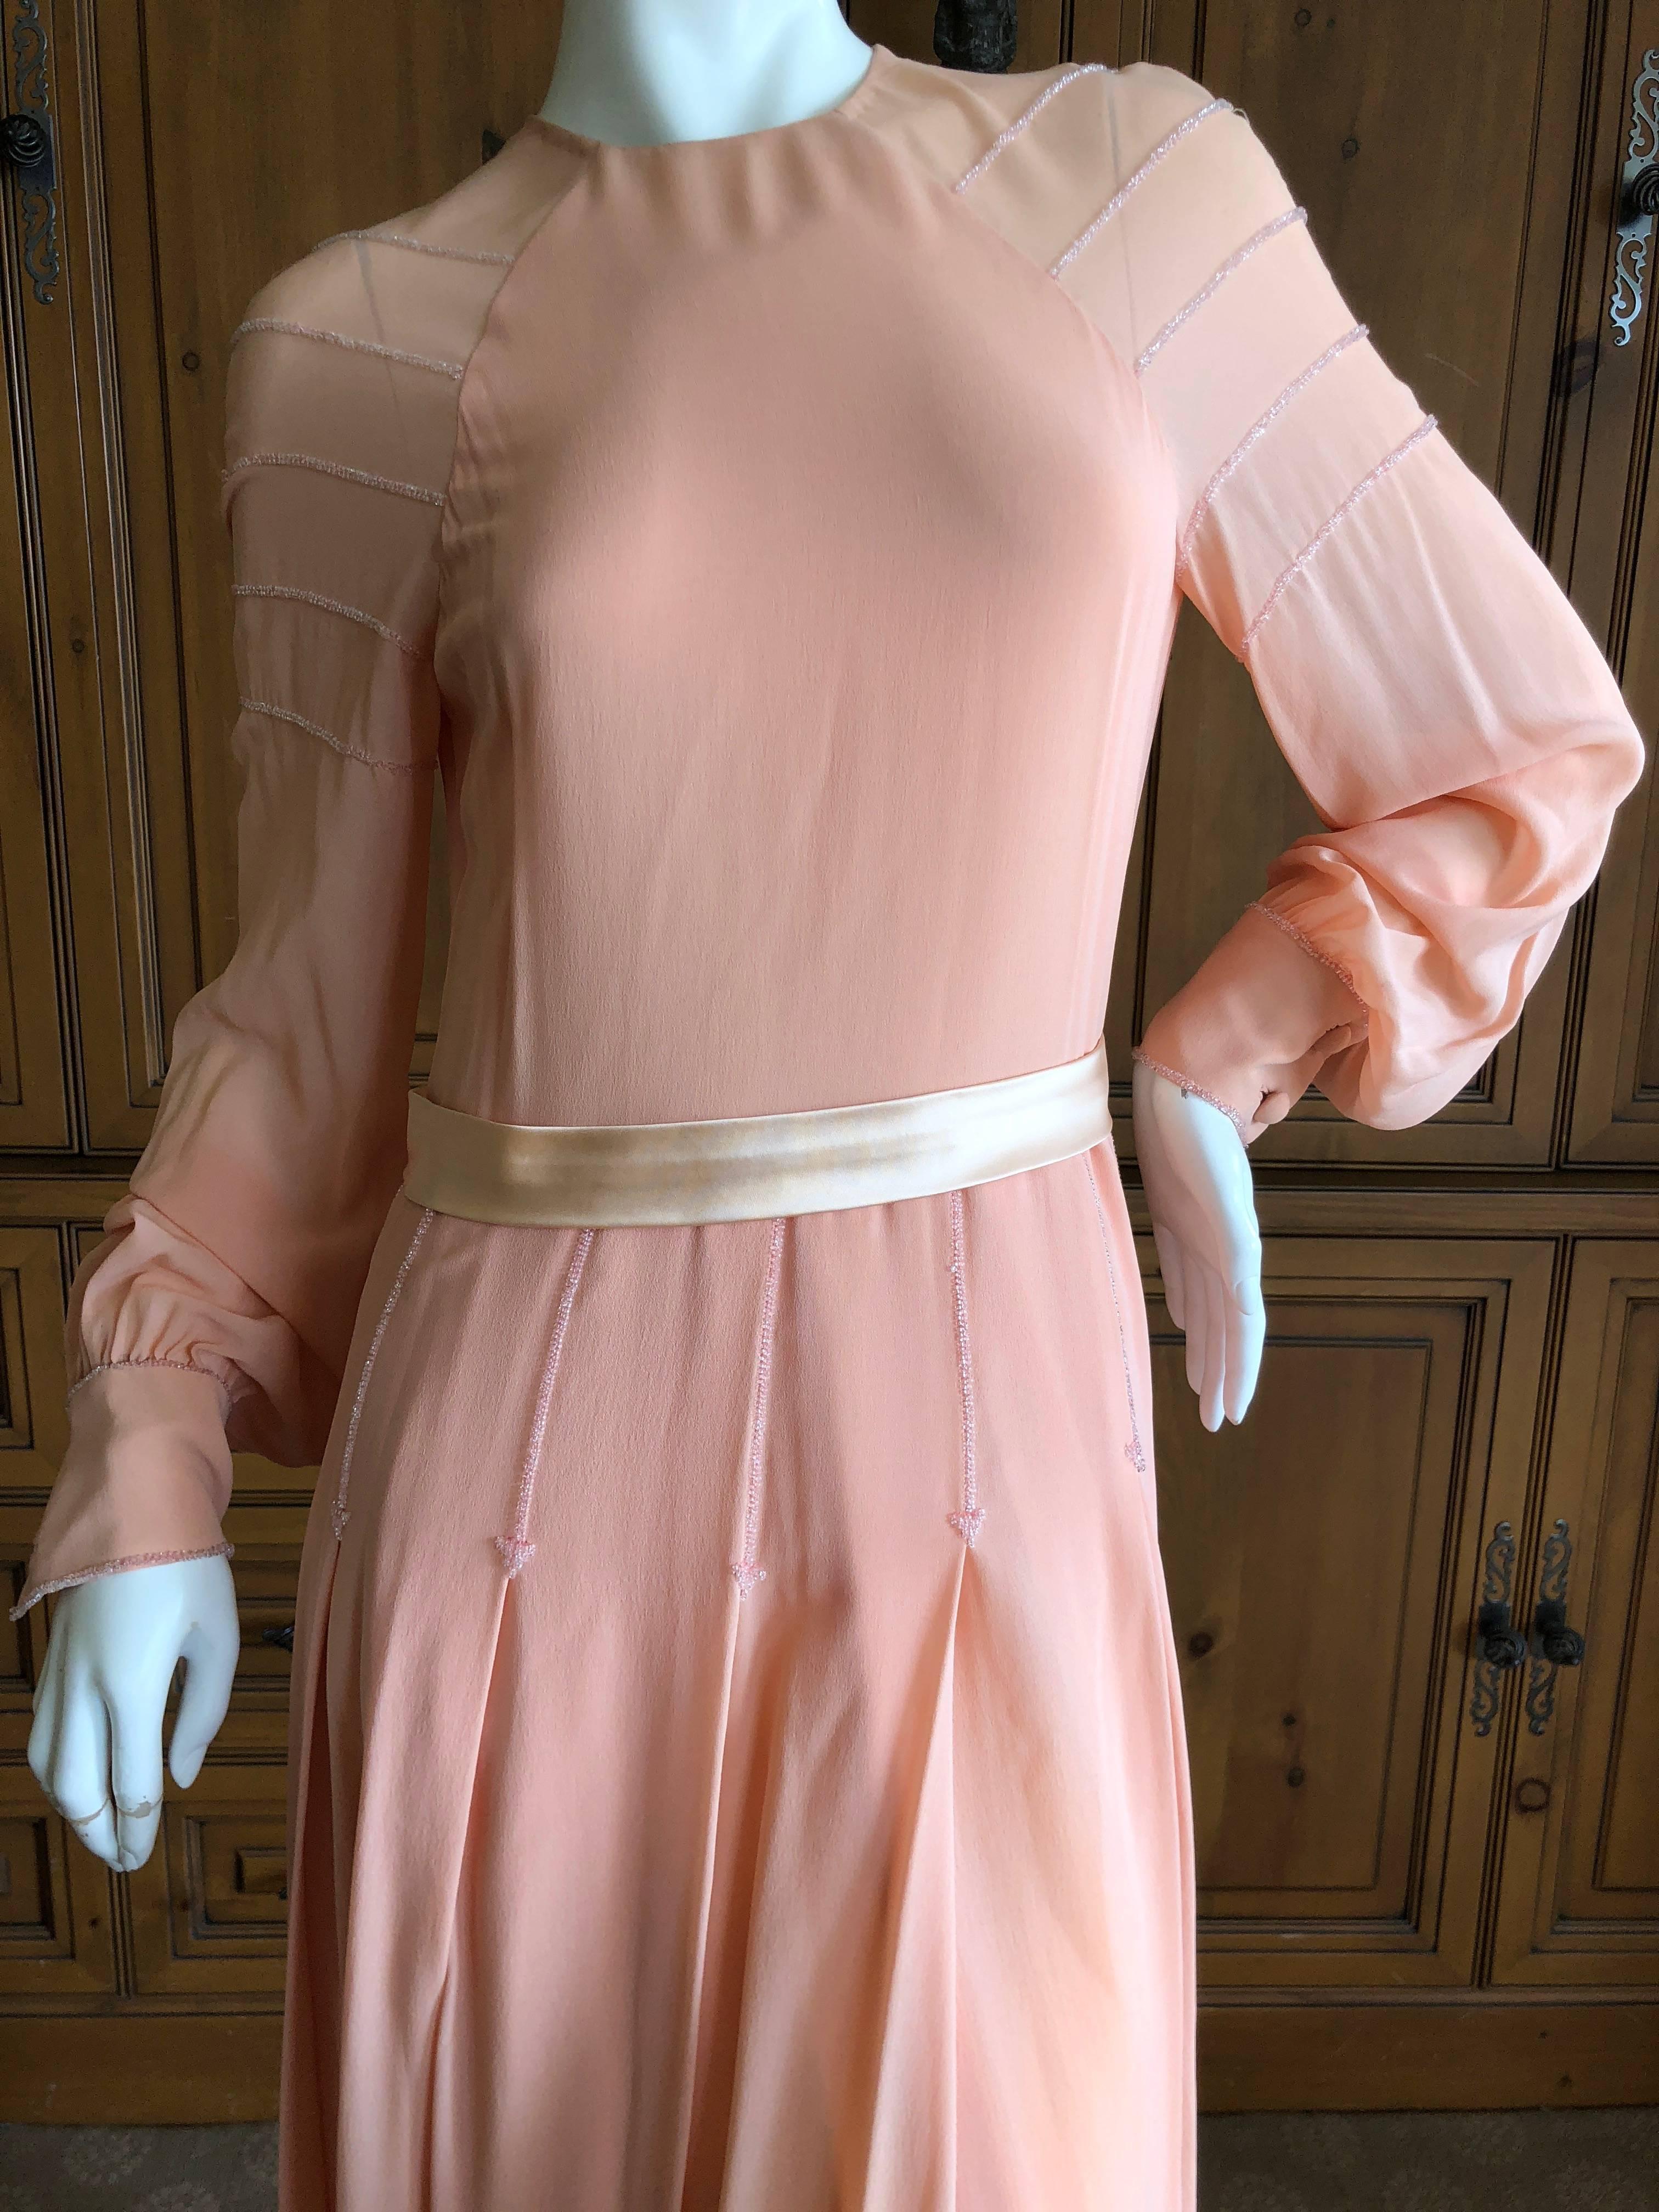 Cardinali 1970's Apricot Silk Chiffon Beaded Evening Dress In Good Condition For Sale In Cloverdale, CA